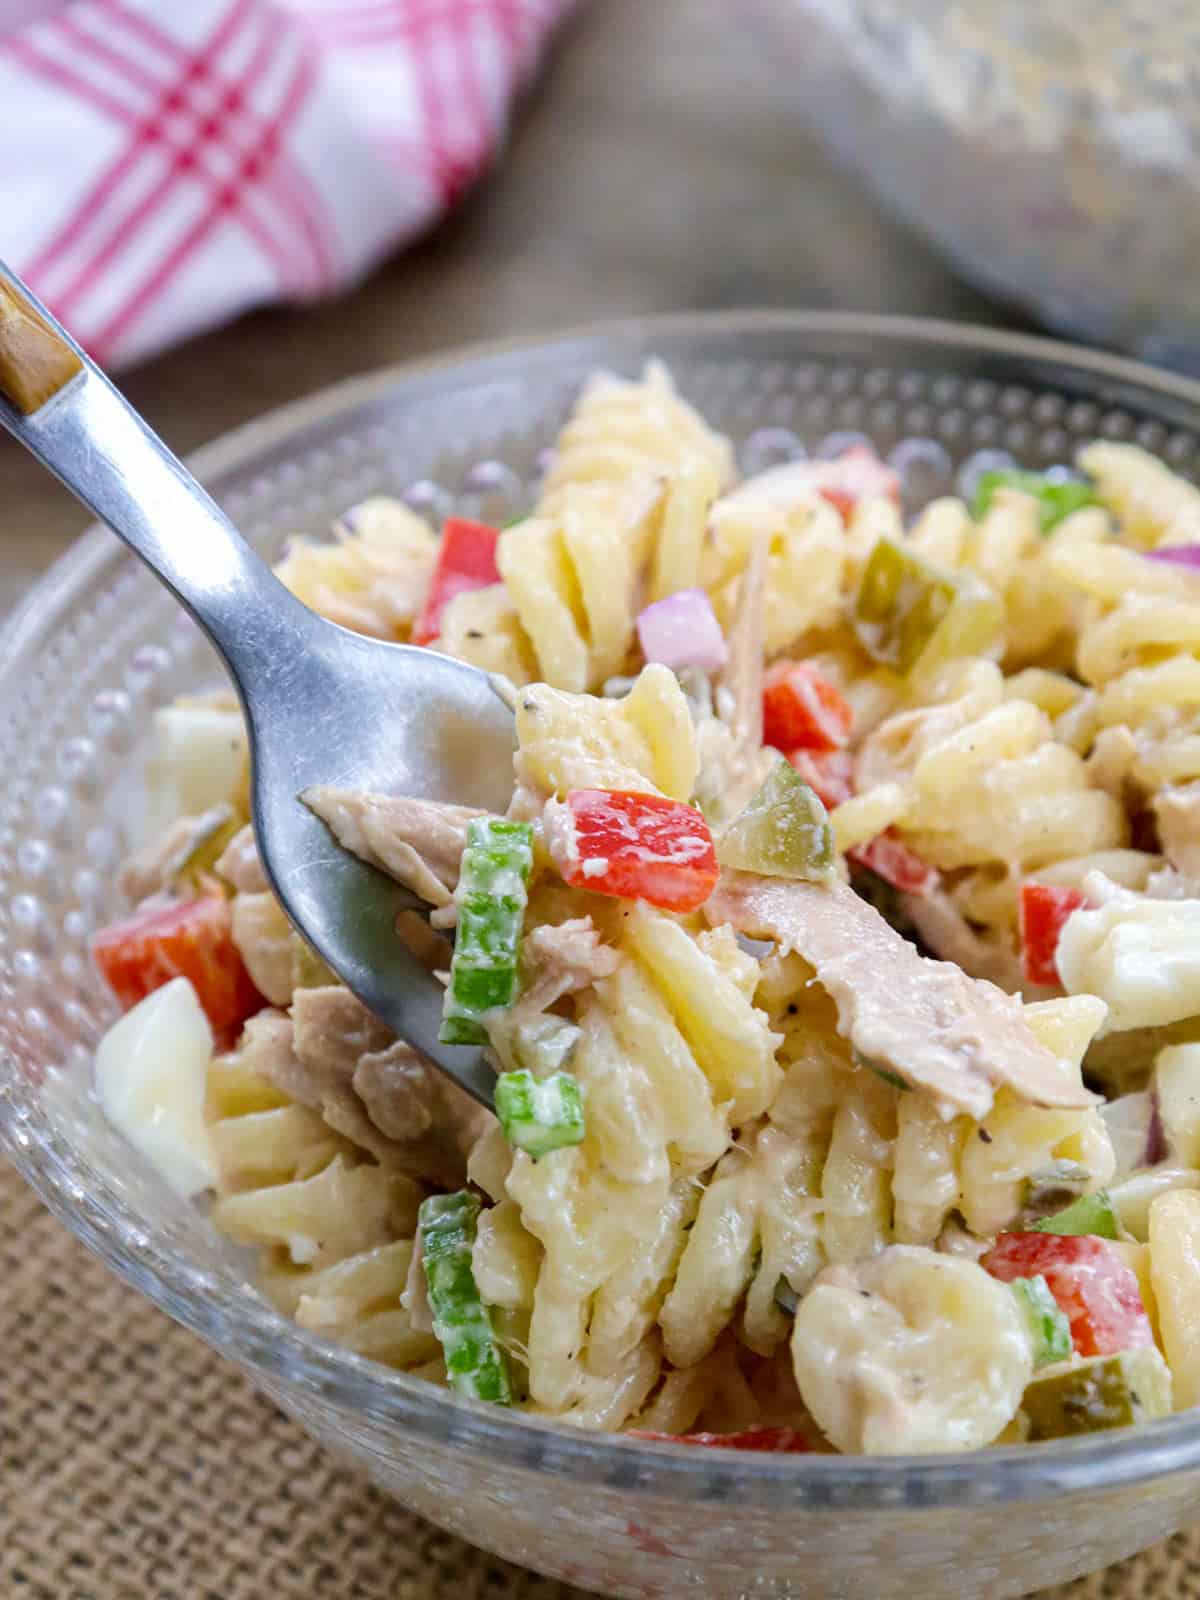 eating Tuna Pasta Salad with a fork.